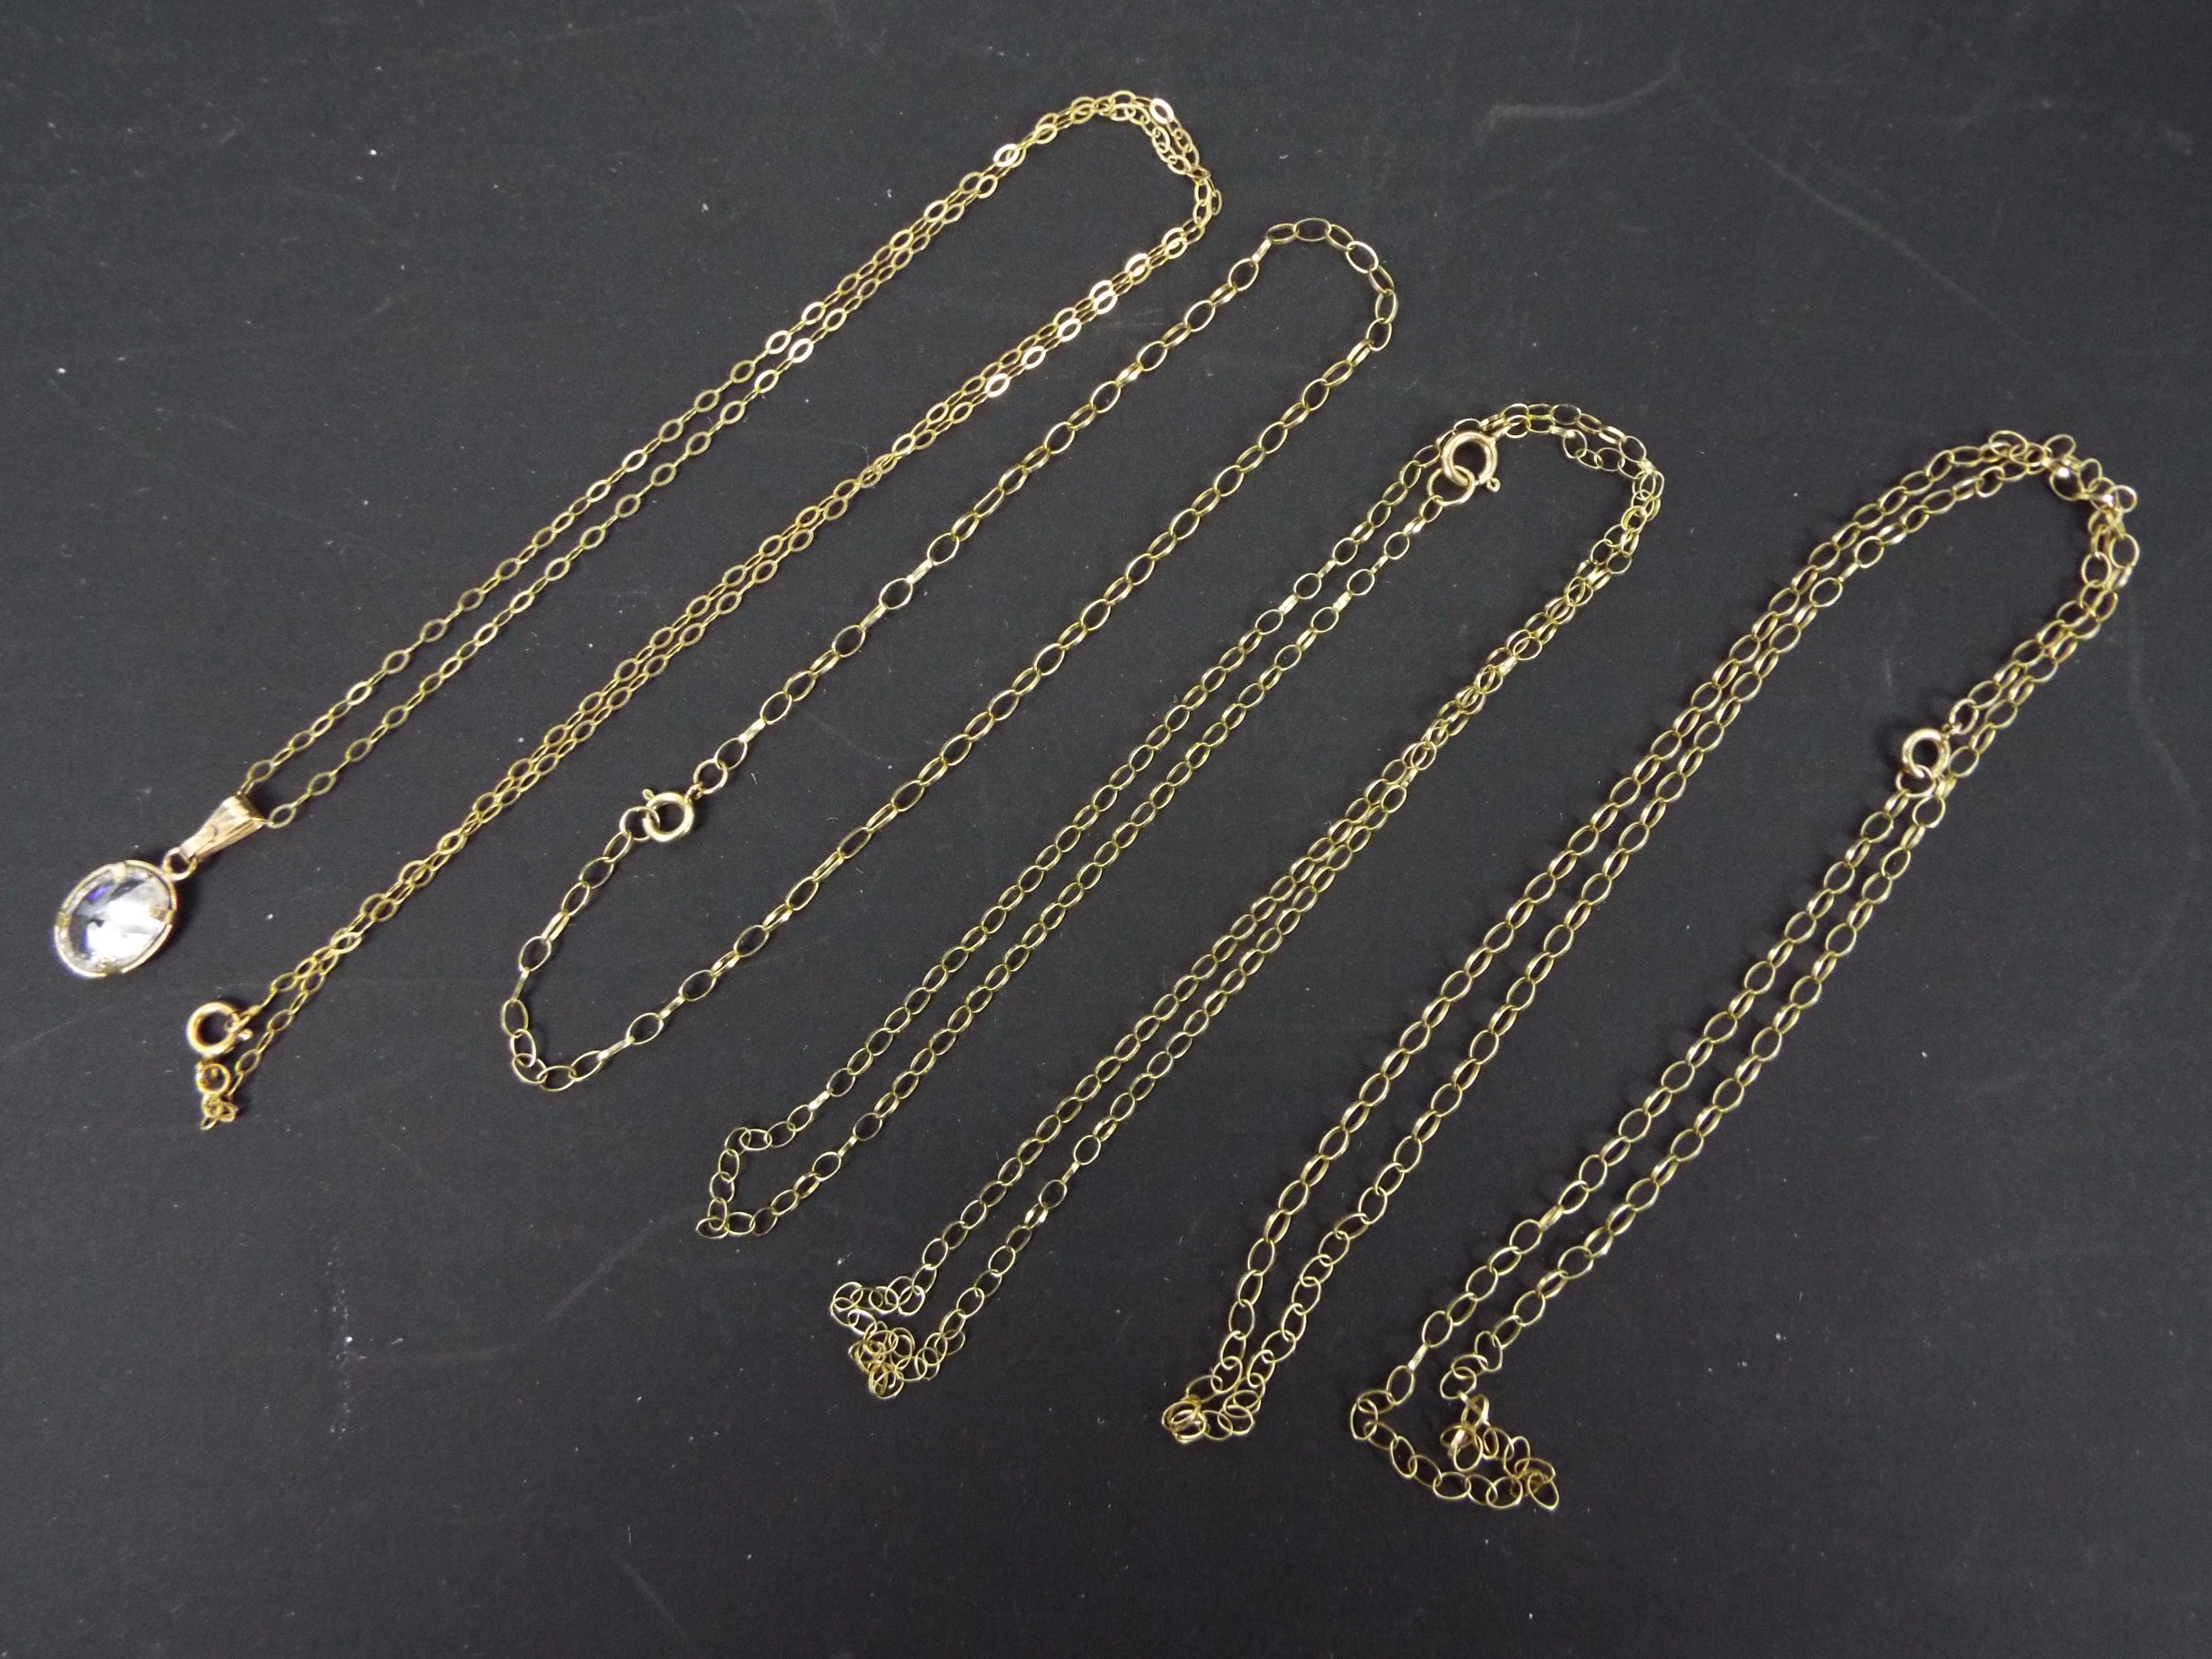 9ct - Three fine trace necklaces (40 cm - 44 cm length), each stamped 9ct / 9k,